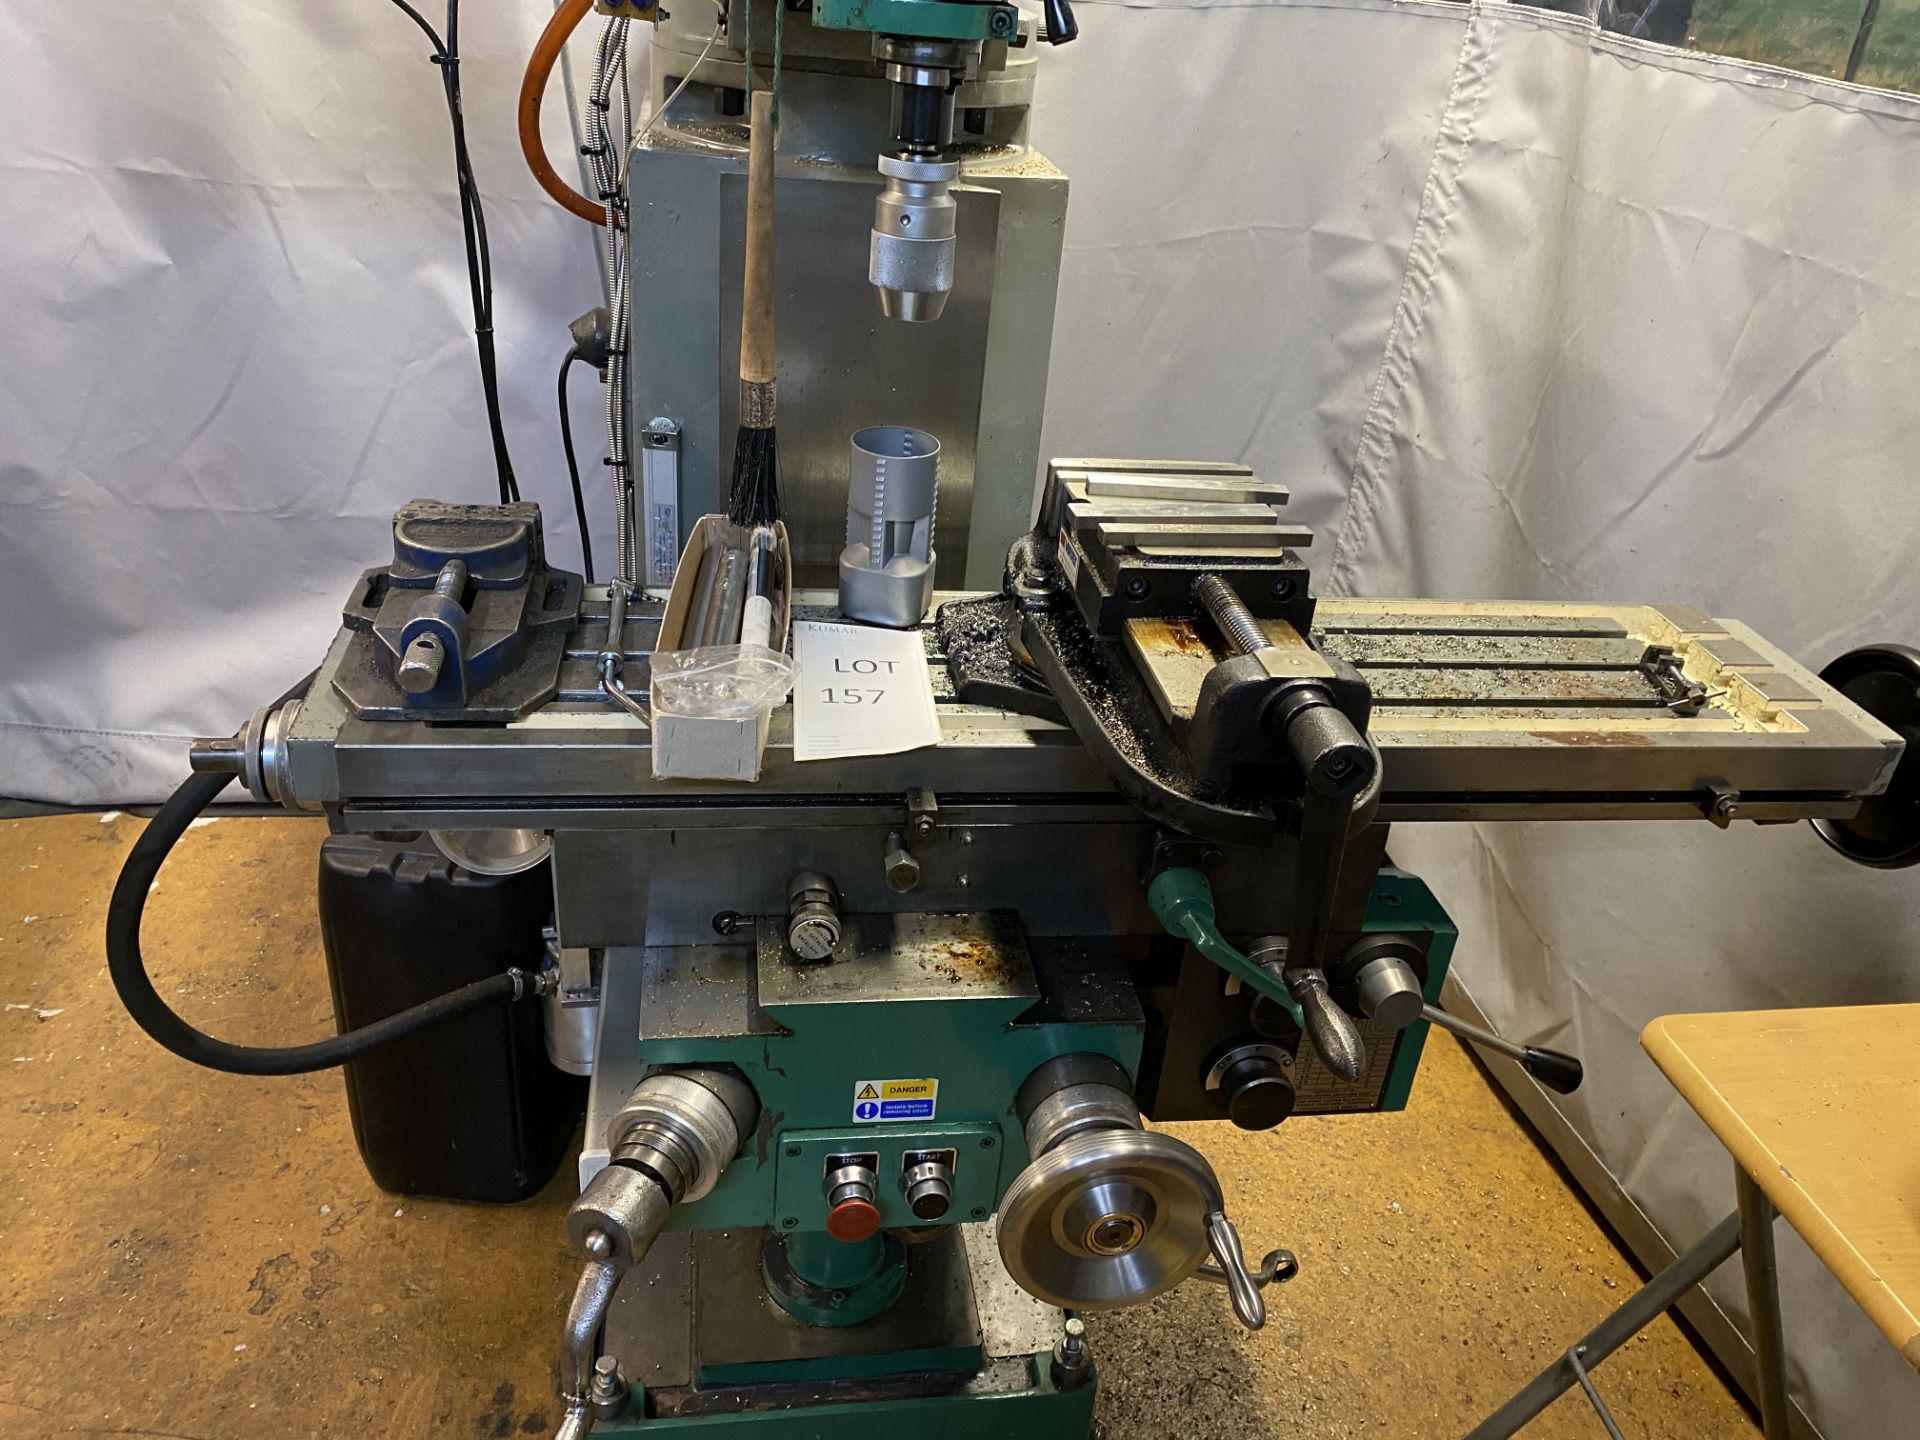 Elliott Milmor 10 Turret Milling Machine Serial No: 015807-119, complete with Sinpo - 3 Axis Dro - Image 3 of 17